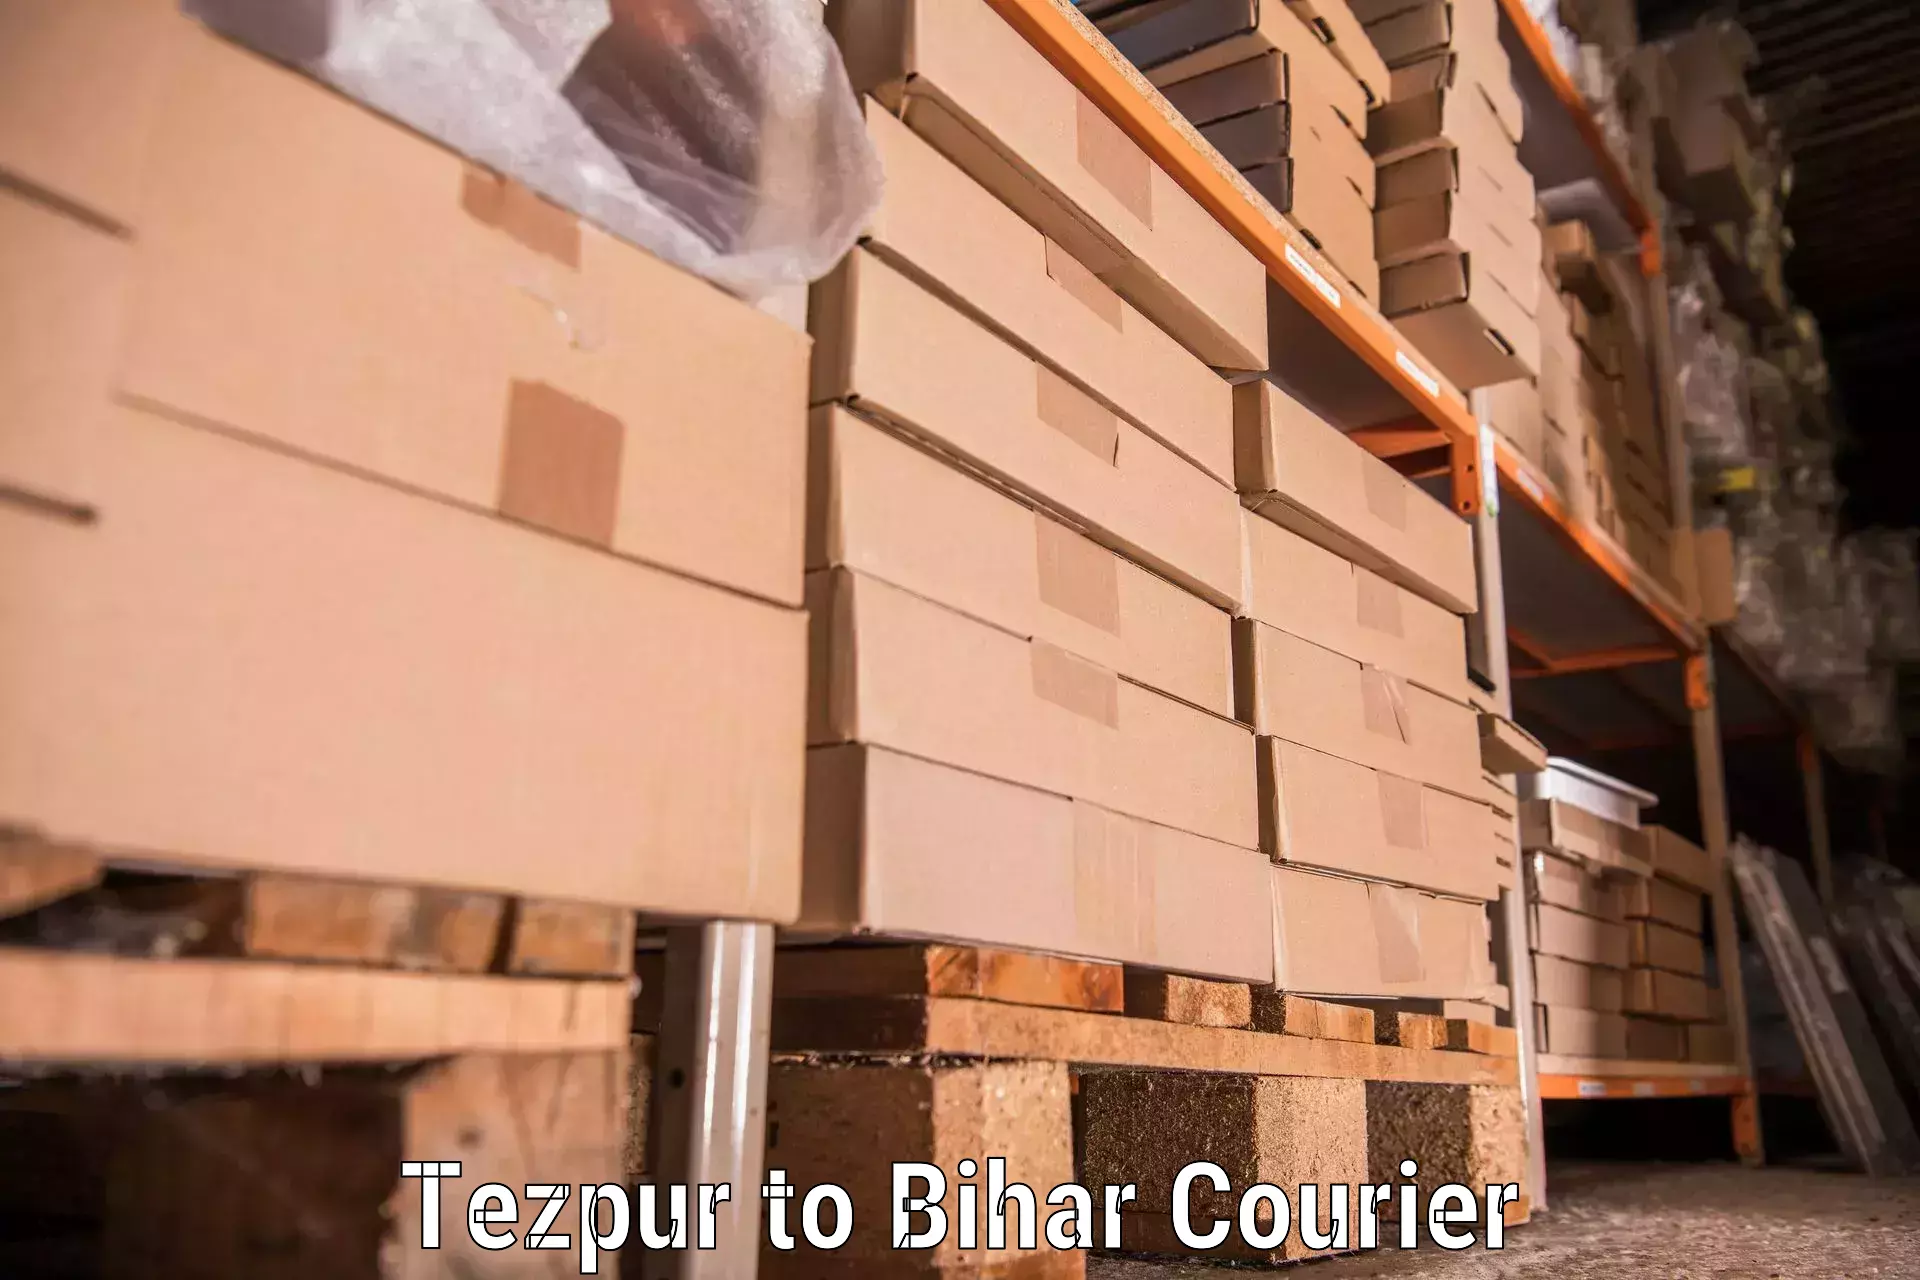 Furniture delivery service Tezpur to Bhorey